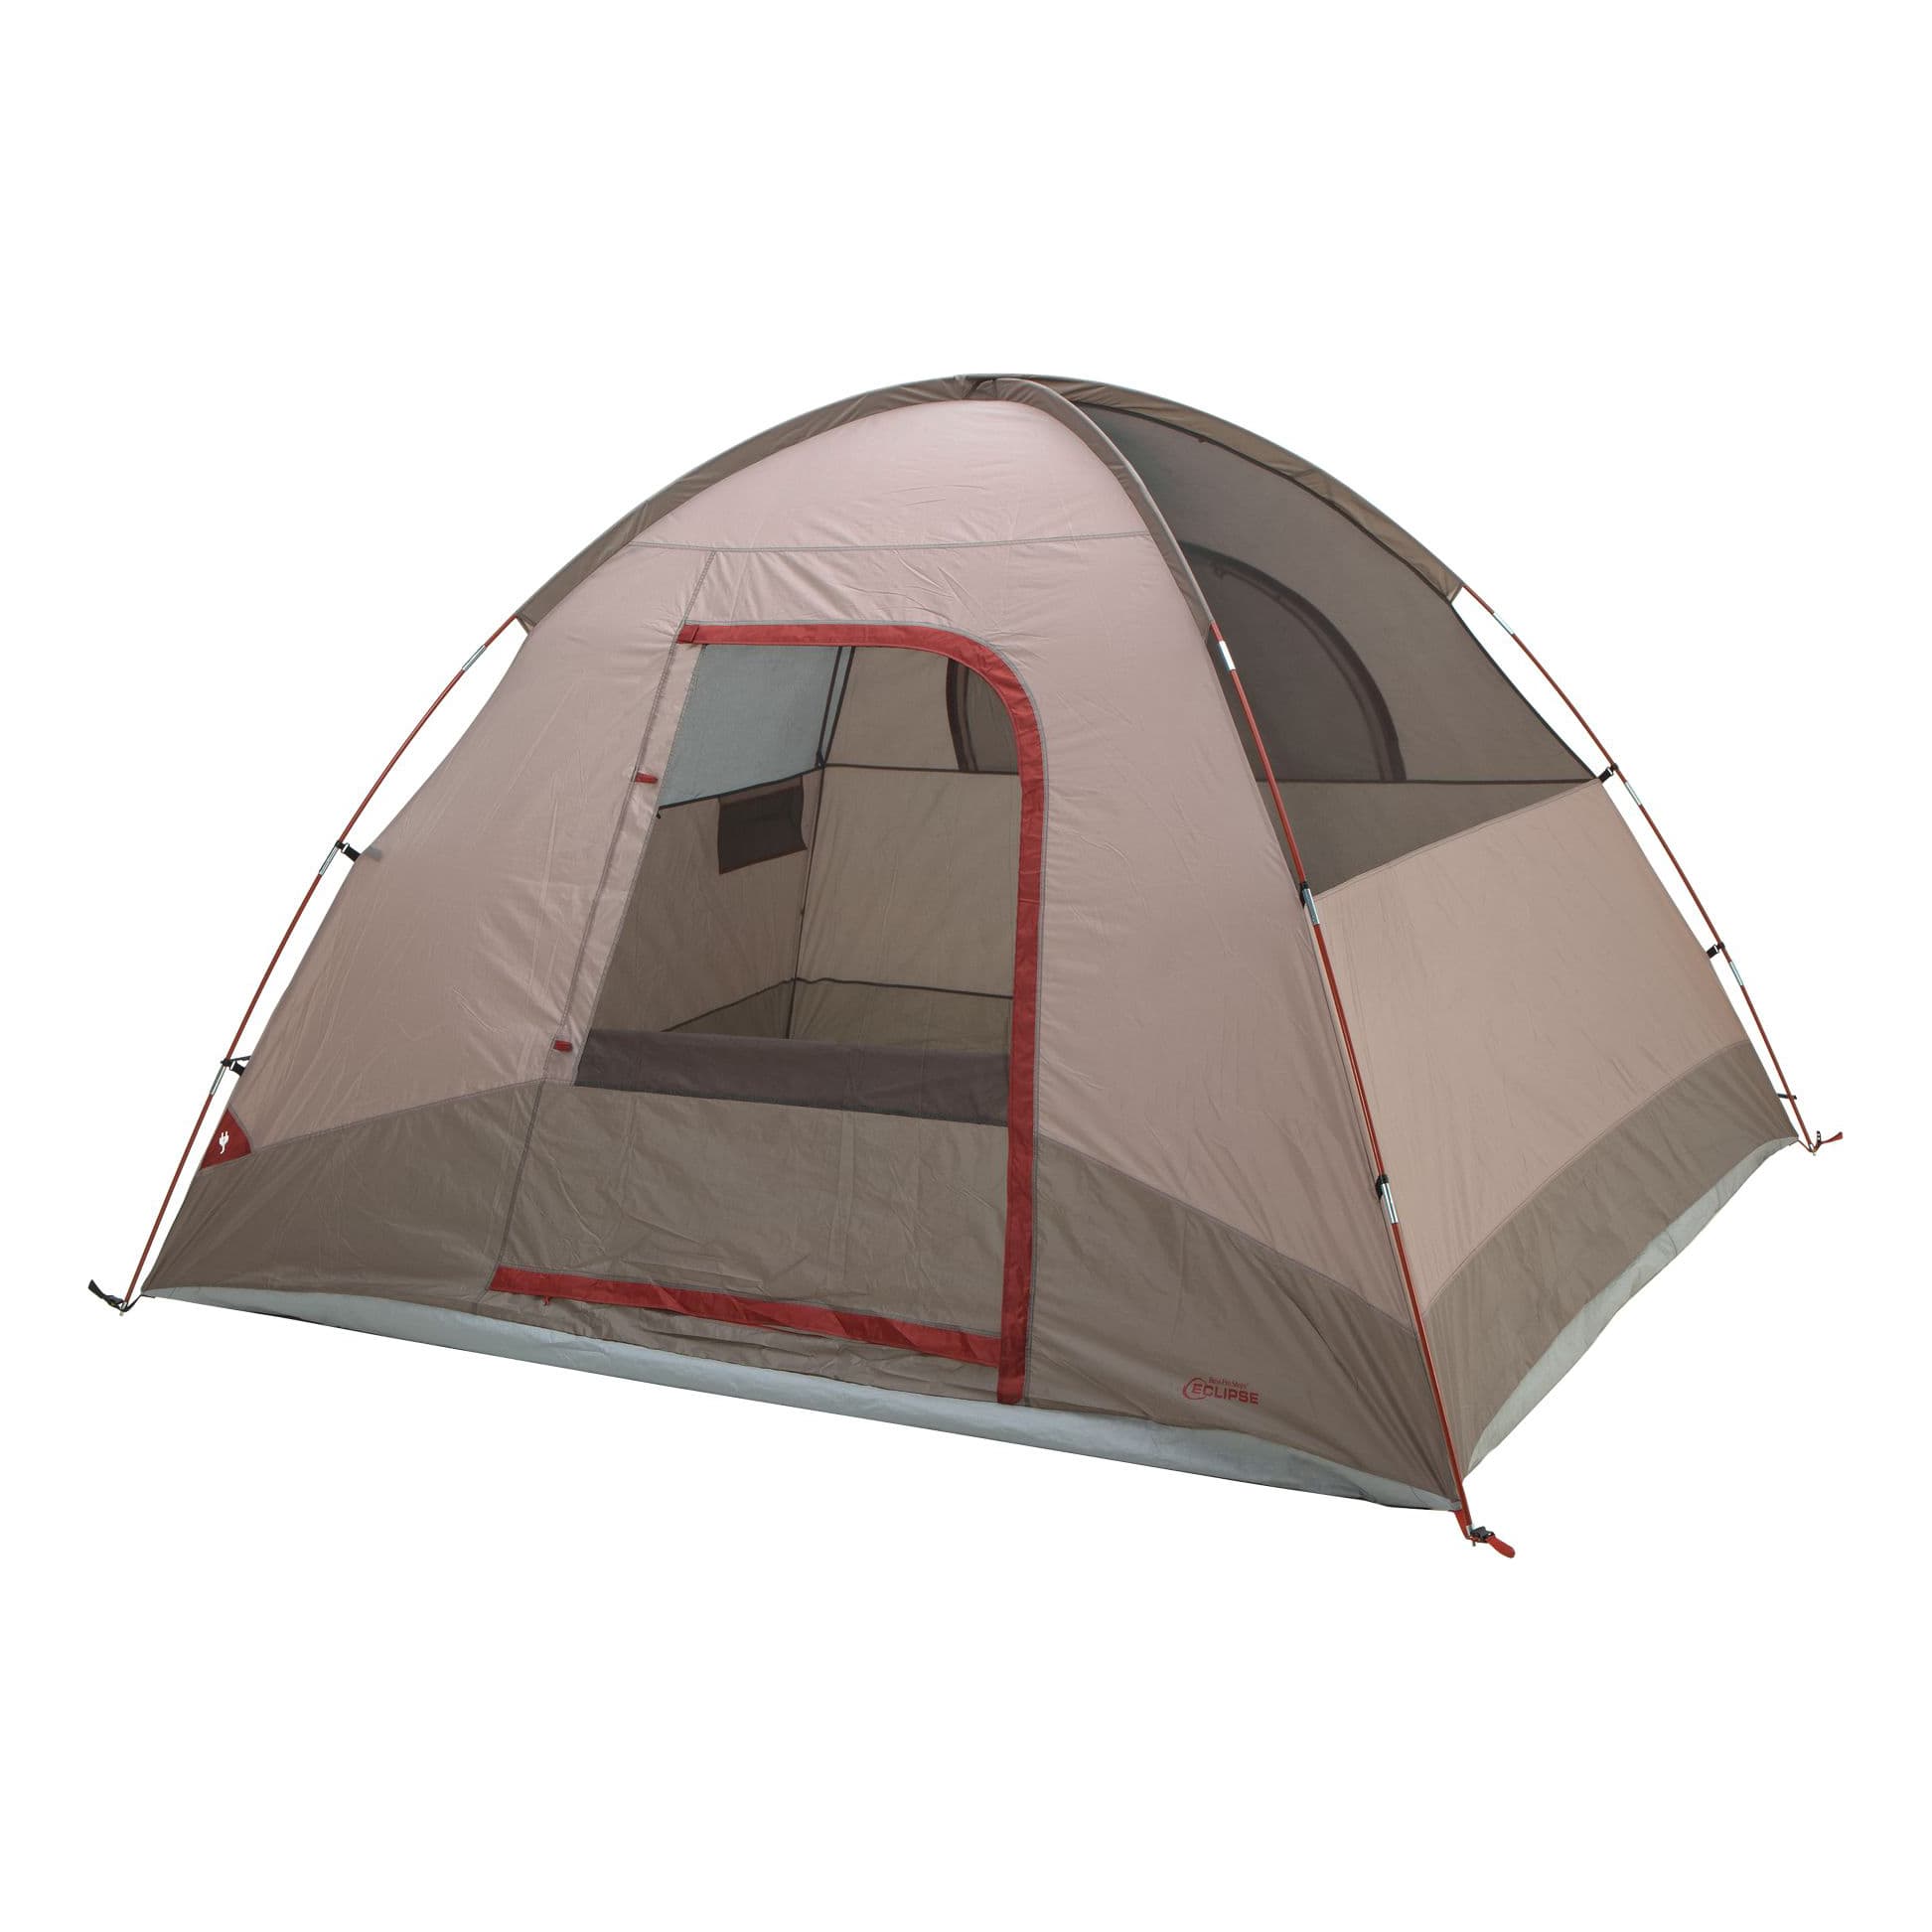 Bass Pro Shops® Eclipse™ Voyager 6-Person Tent with Screen Porch - Window View